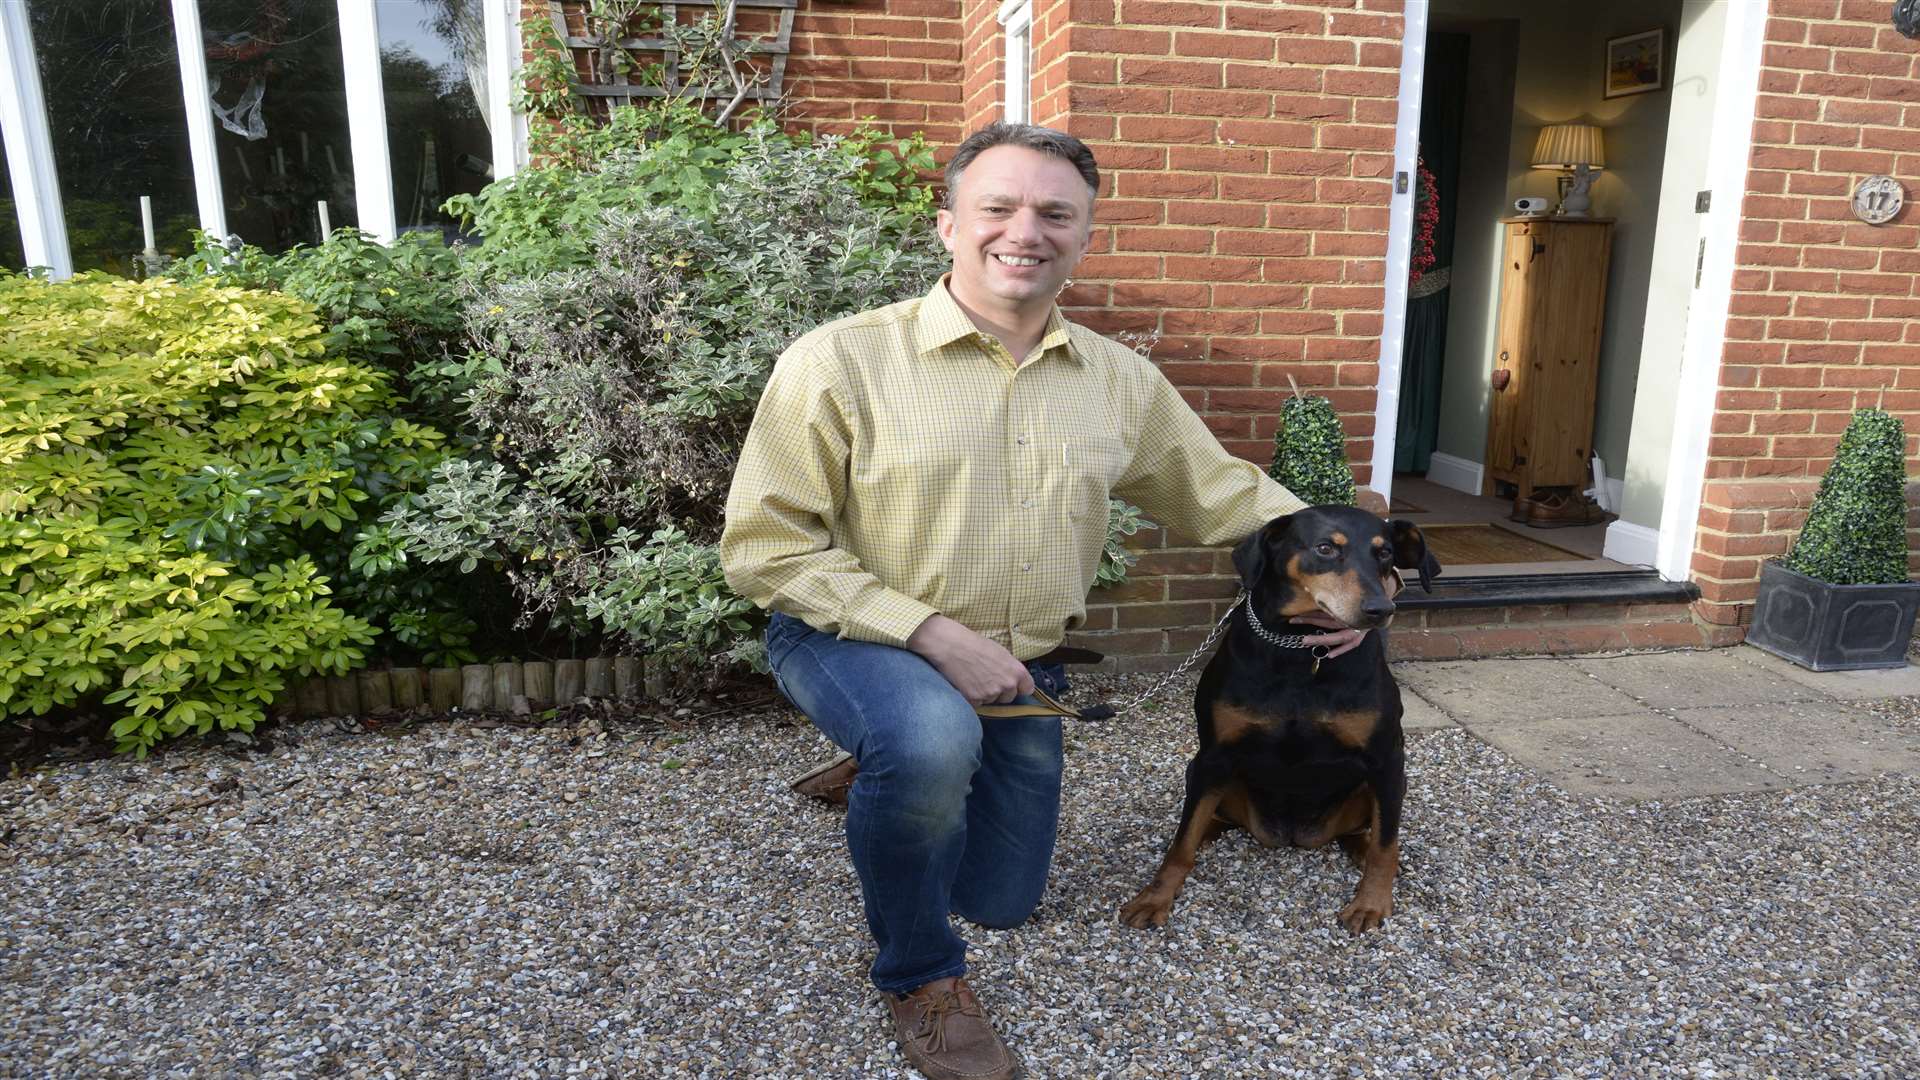 Michael Johnson and his dog Zara of Chestfield. Picture: Chris Davey